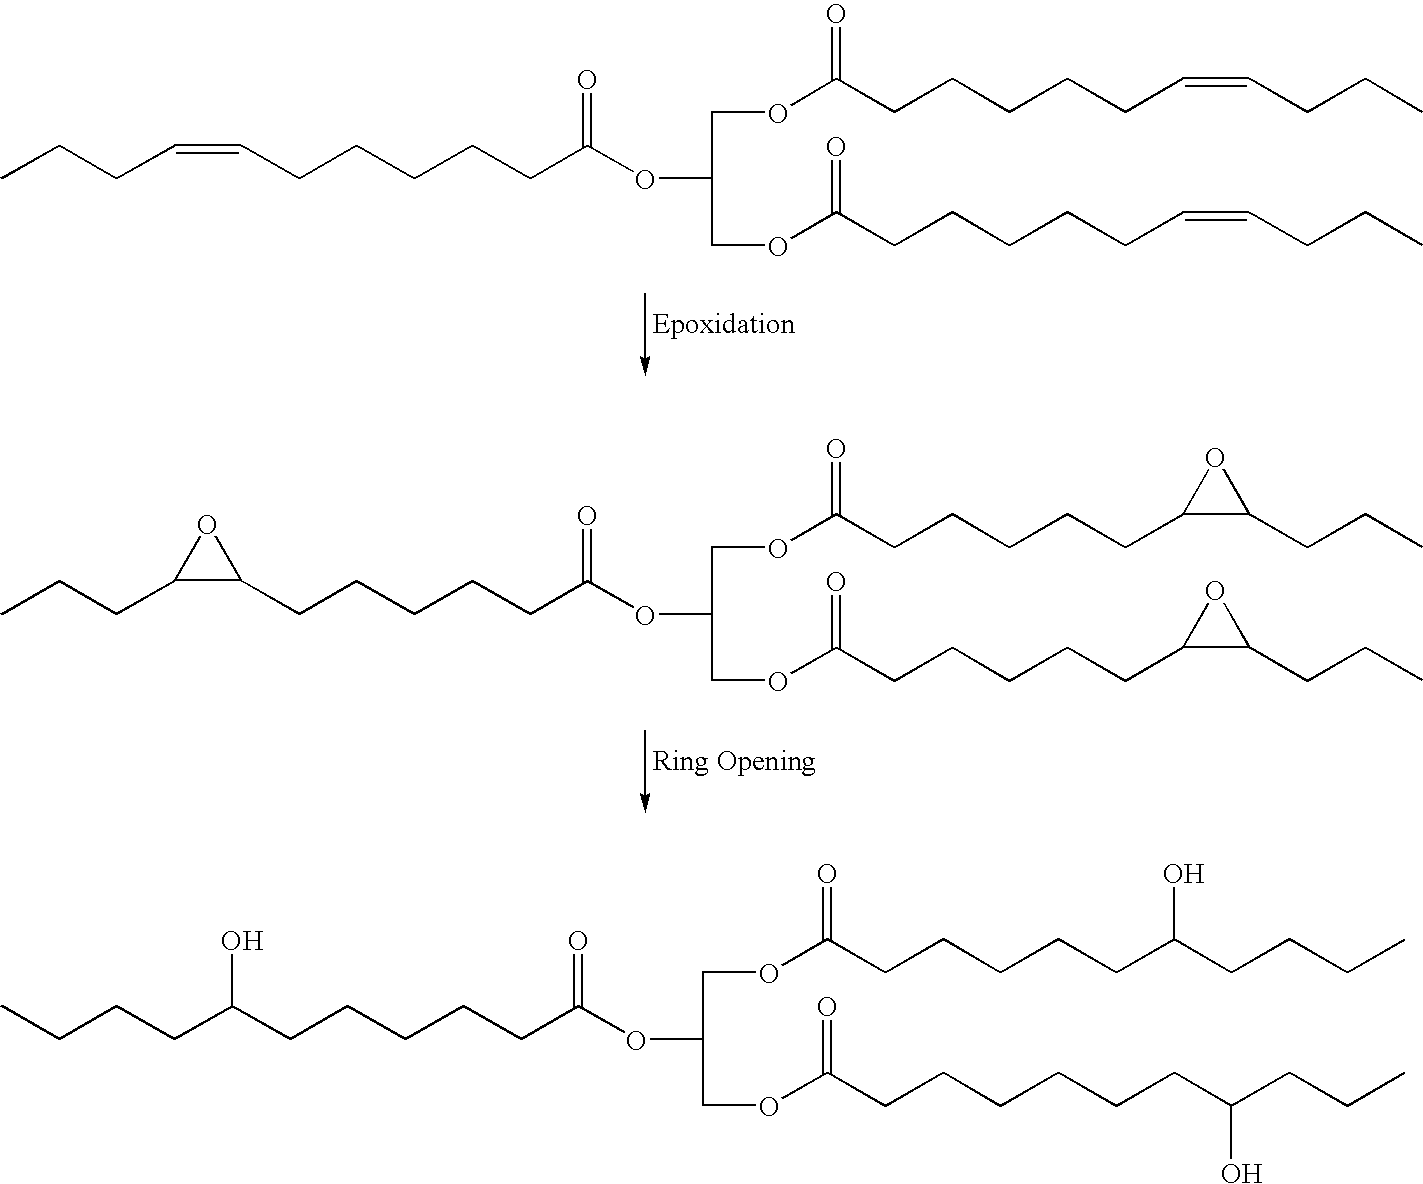 Polyols from plant oils and methods of conversion